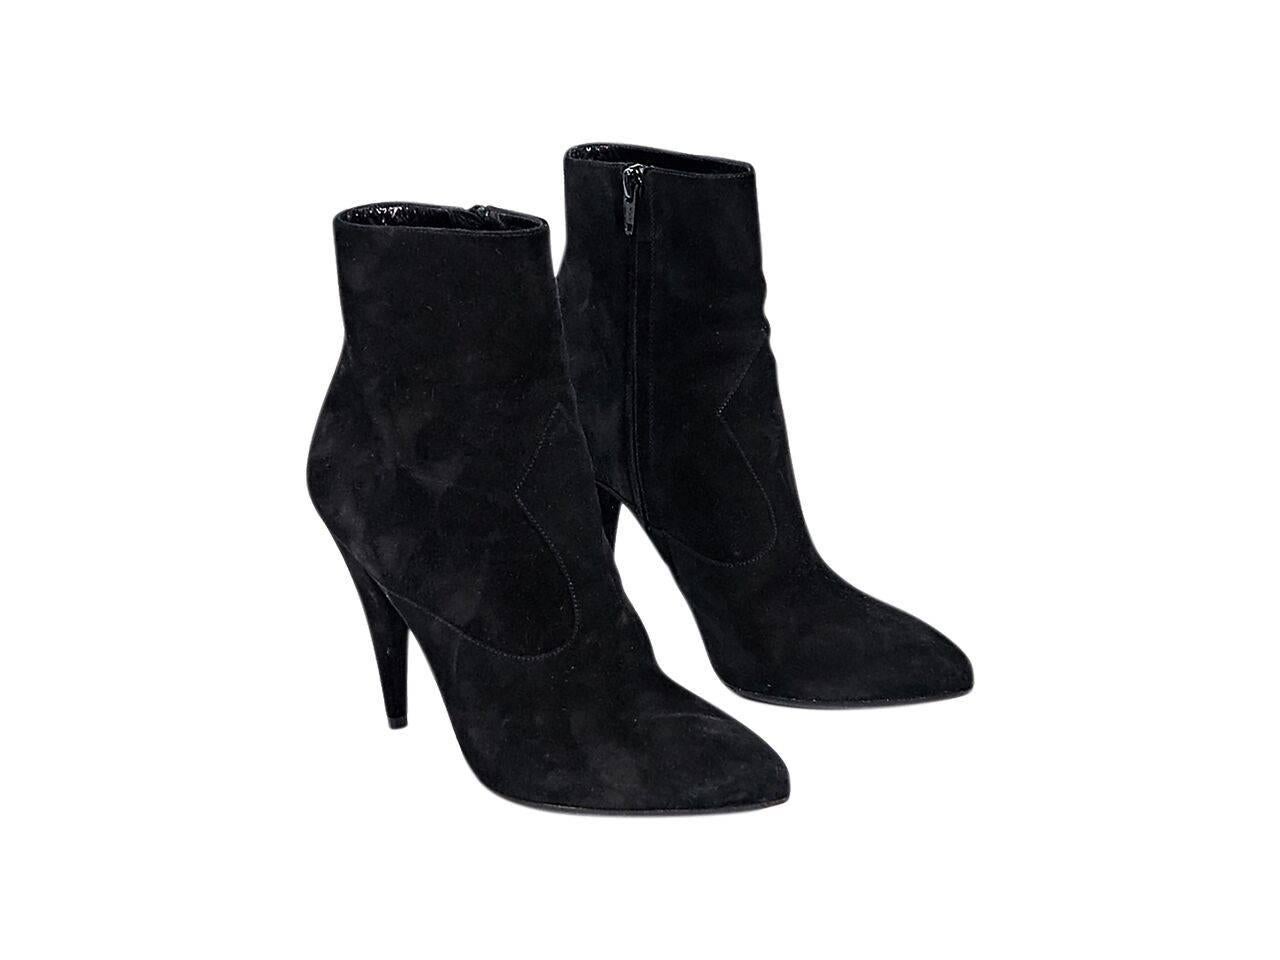 Product details:  Black suede ankle boots by Saint Laurent.  Western-style design.  Inner zip closure.  Almond toe.  Conical heel. 
Condition: Pre-owned. Very good.
Est. Retail $ 1,025.00